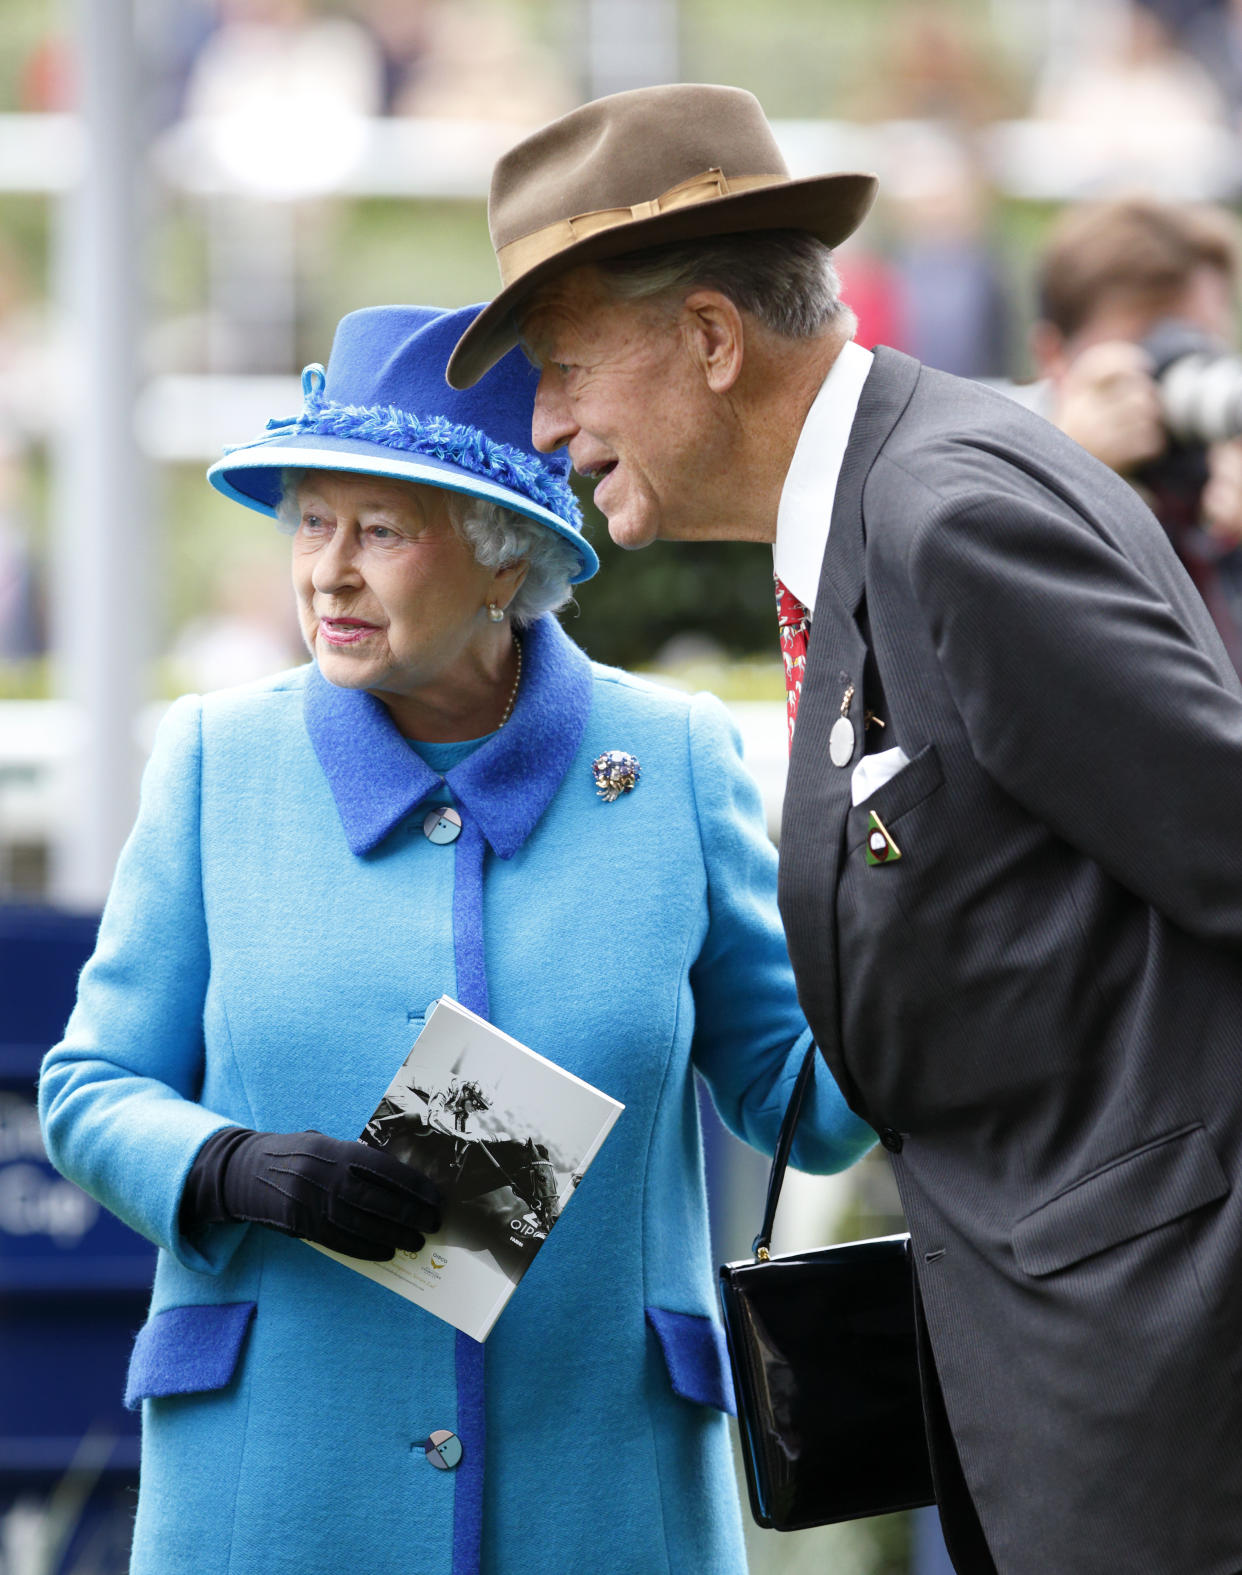 ASCOT, UNITED KINGDOM - OCTOBER 18: (EMBARGOED FOR PUBLICATION IN UK NEWSPAPERS UNTIL 48 HOURS AFTER CREATE DATE AND TIME) Queen Elizabeth II and Sir Michael Oswald attend the QIPCO British Champions Day at Ascot Racecourse on October 18, 2014 in Ascot, England. (Photo by Max Mumby/Indigo/Getty Images)